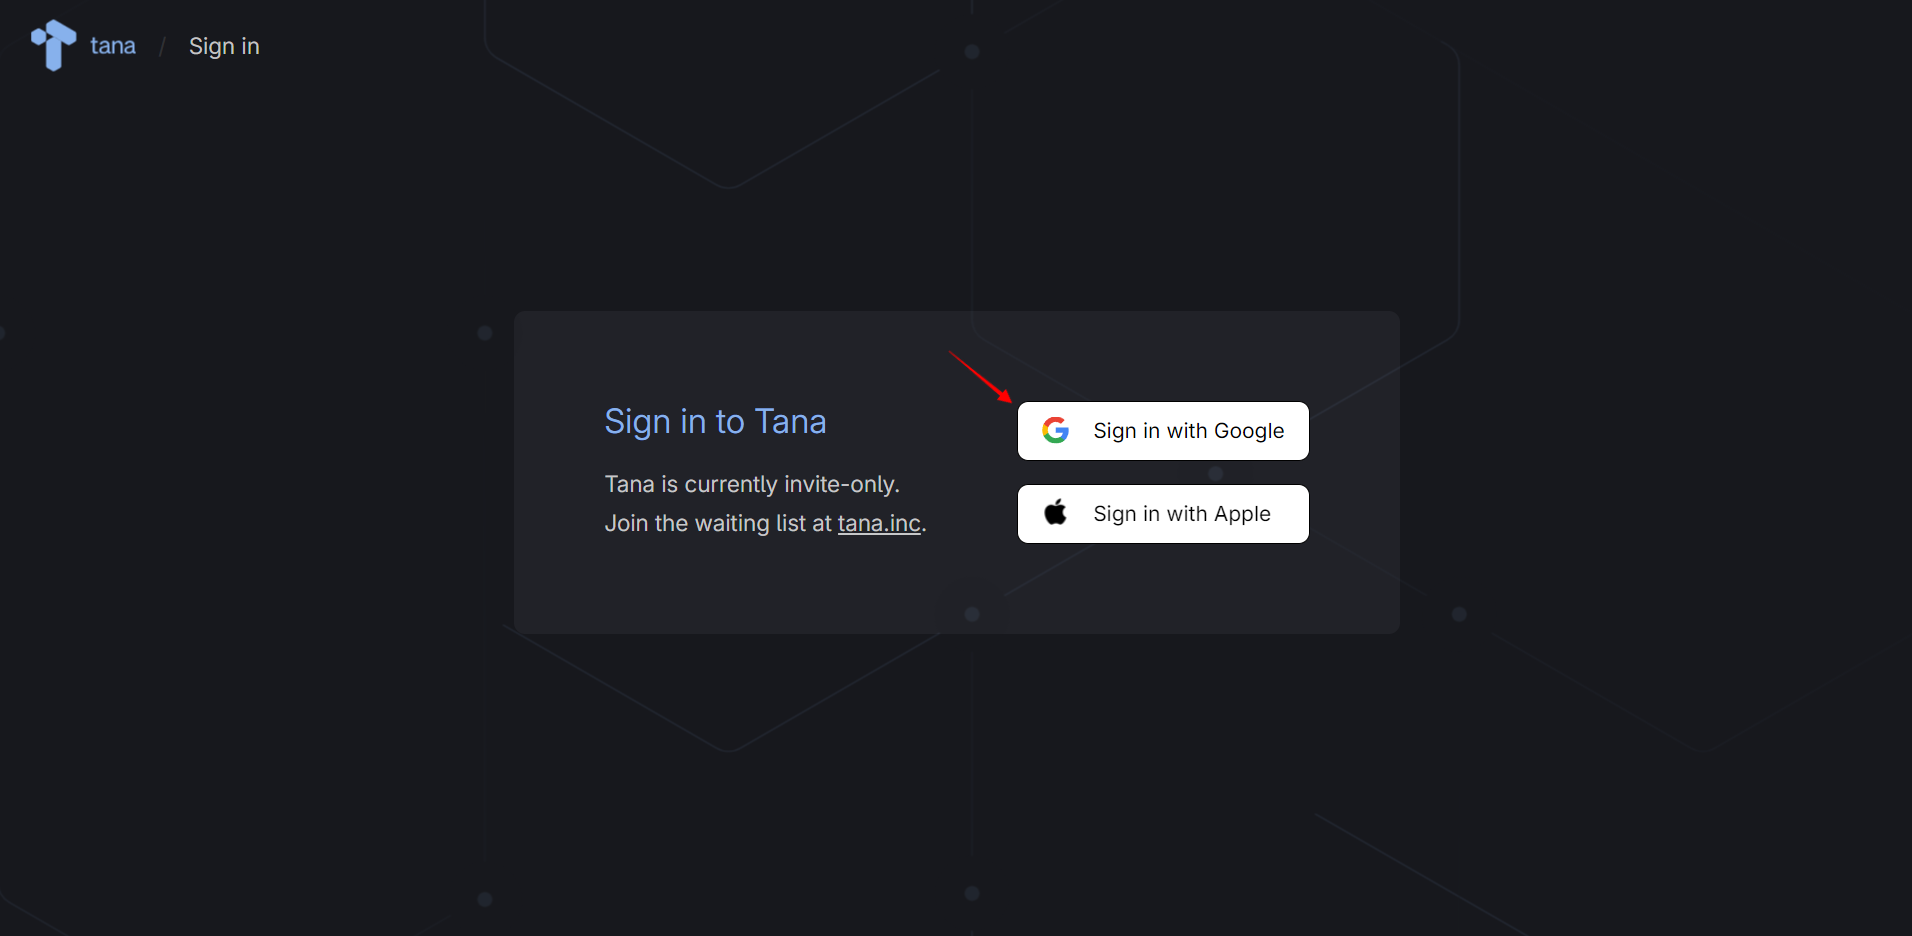 Log in to your Tana account using your Google or Apple account